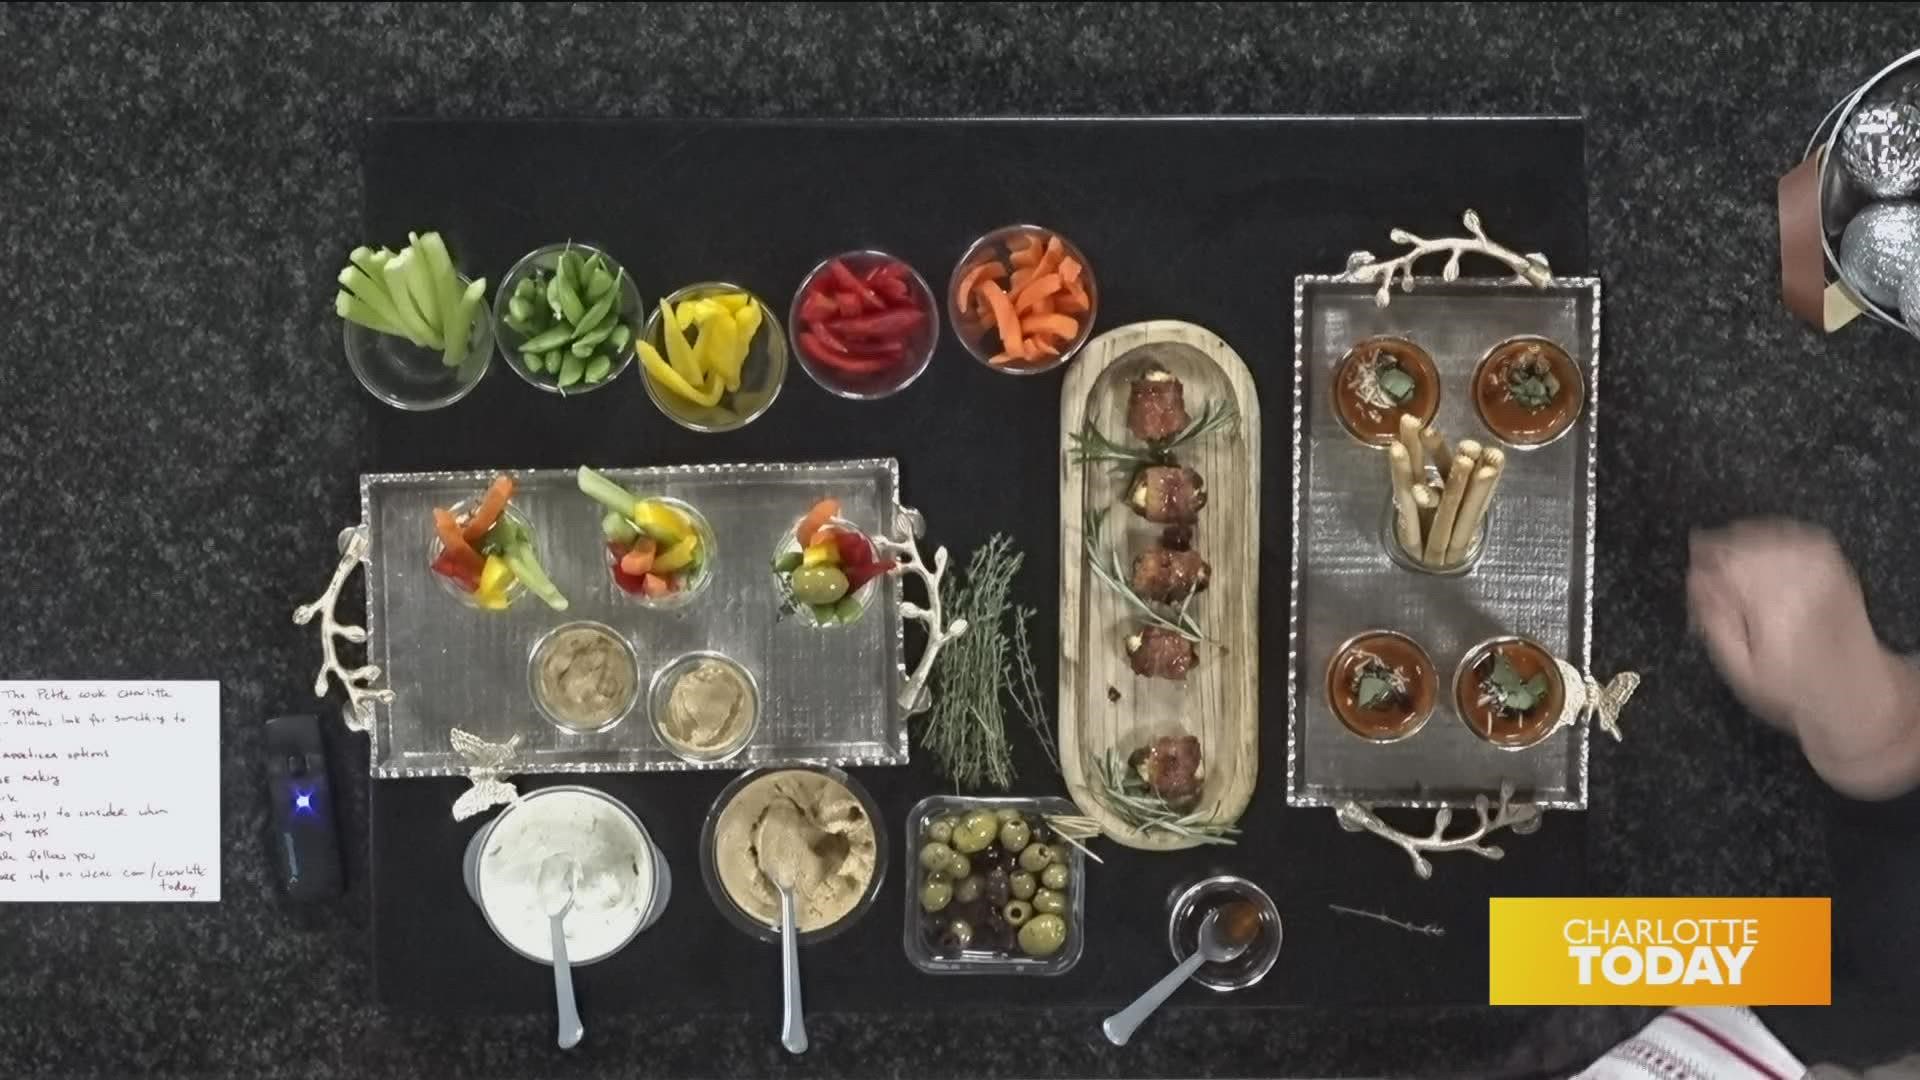 Yvette shares easy to put together appetizers to display